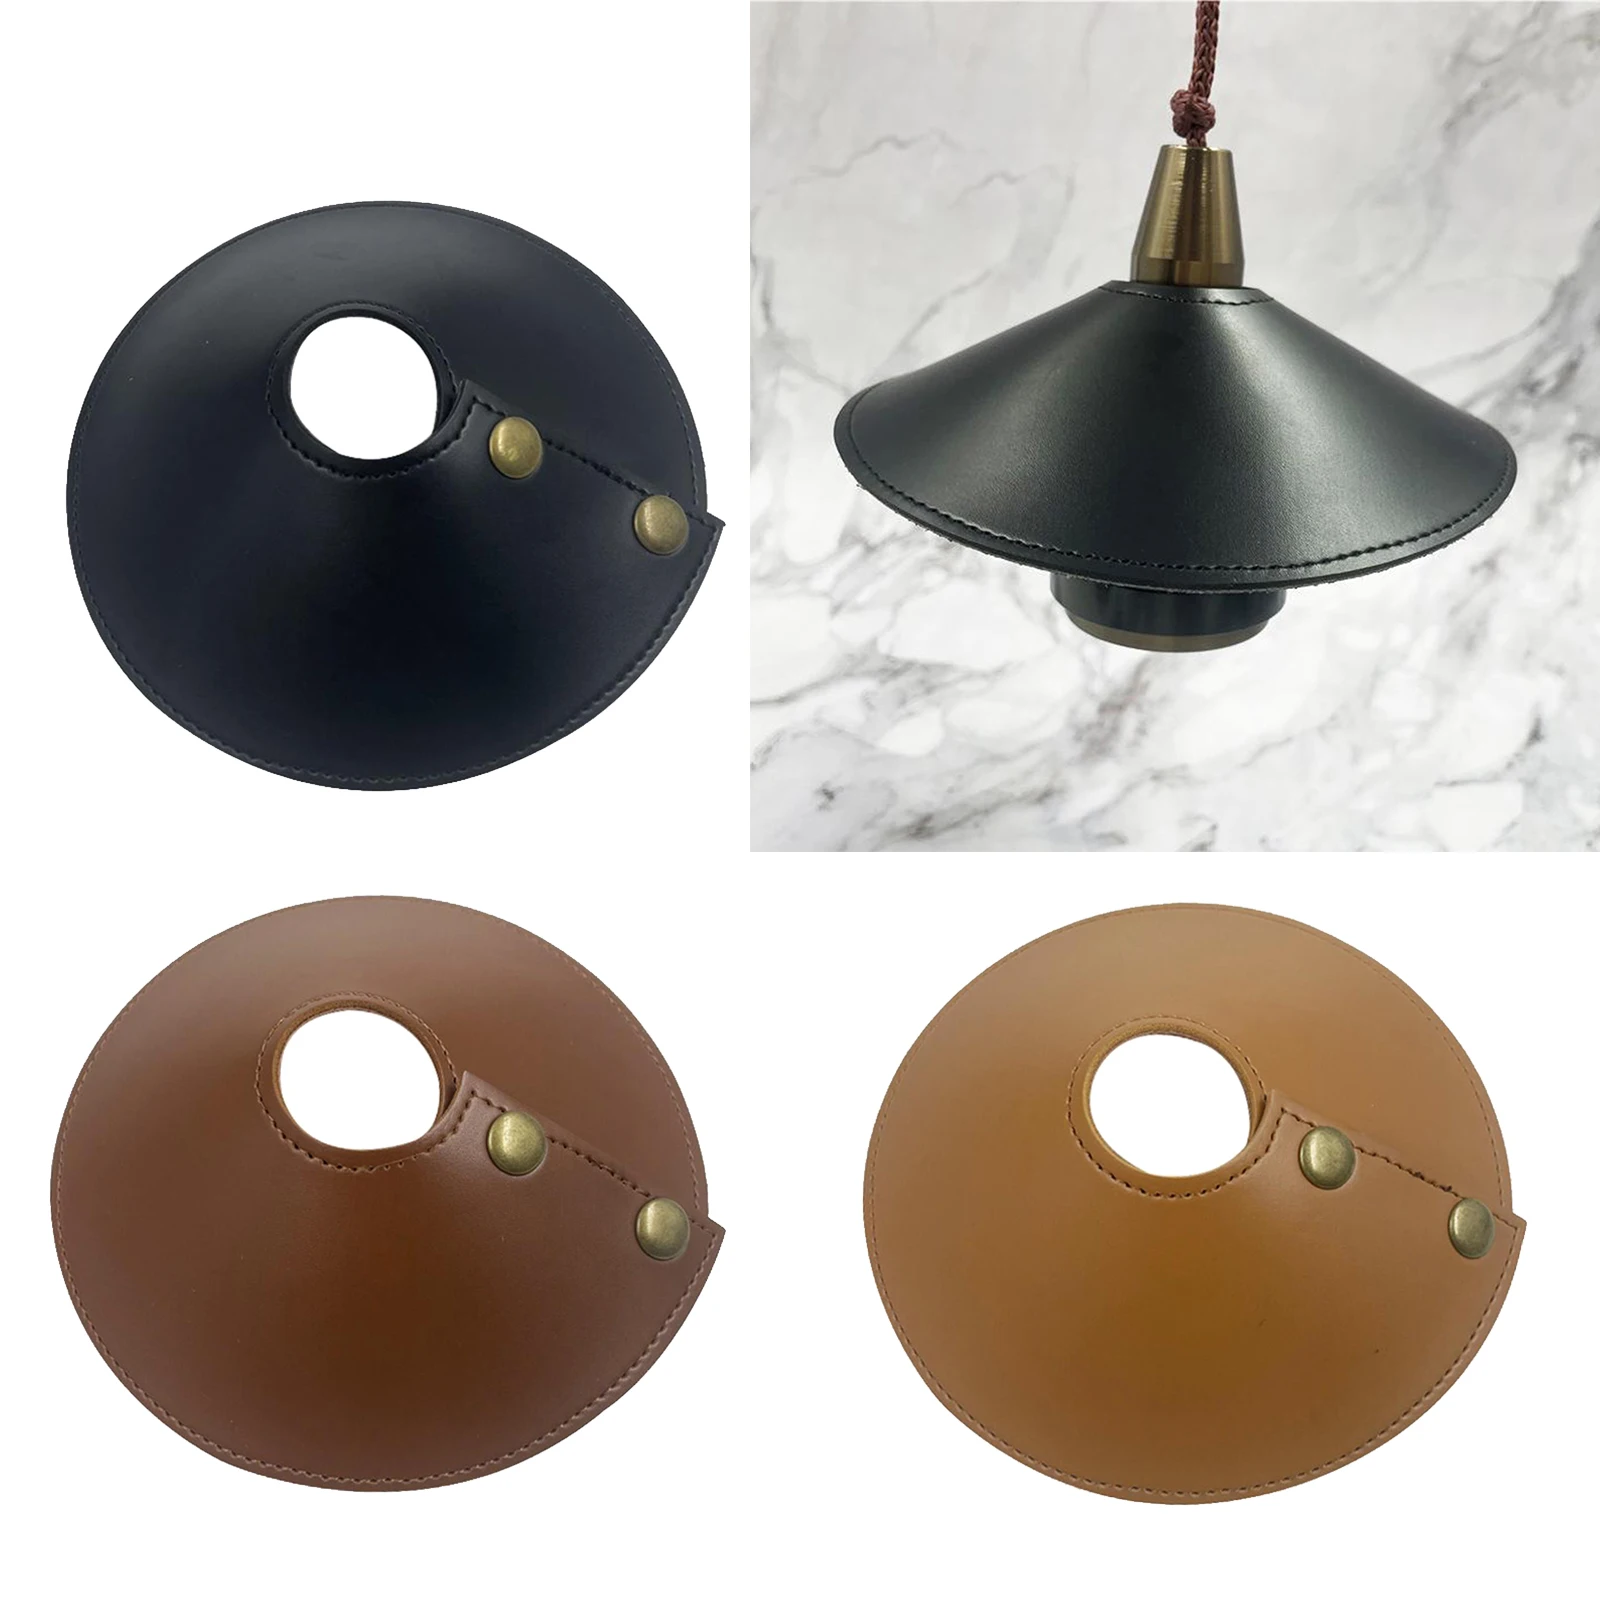 Modern Leather Lampshade, Outdoor Lamp Shade Replacement Thickened Cover Dust-proof